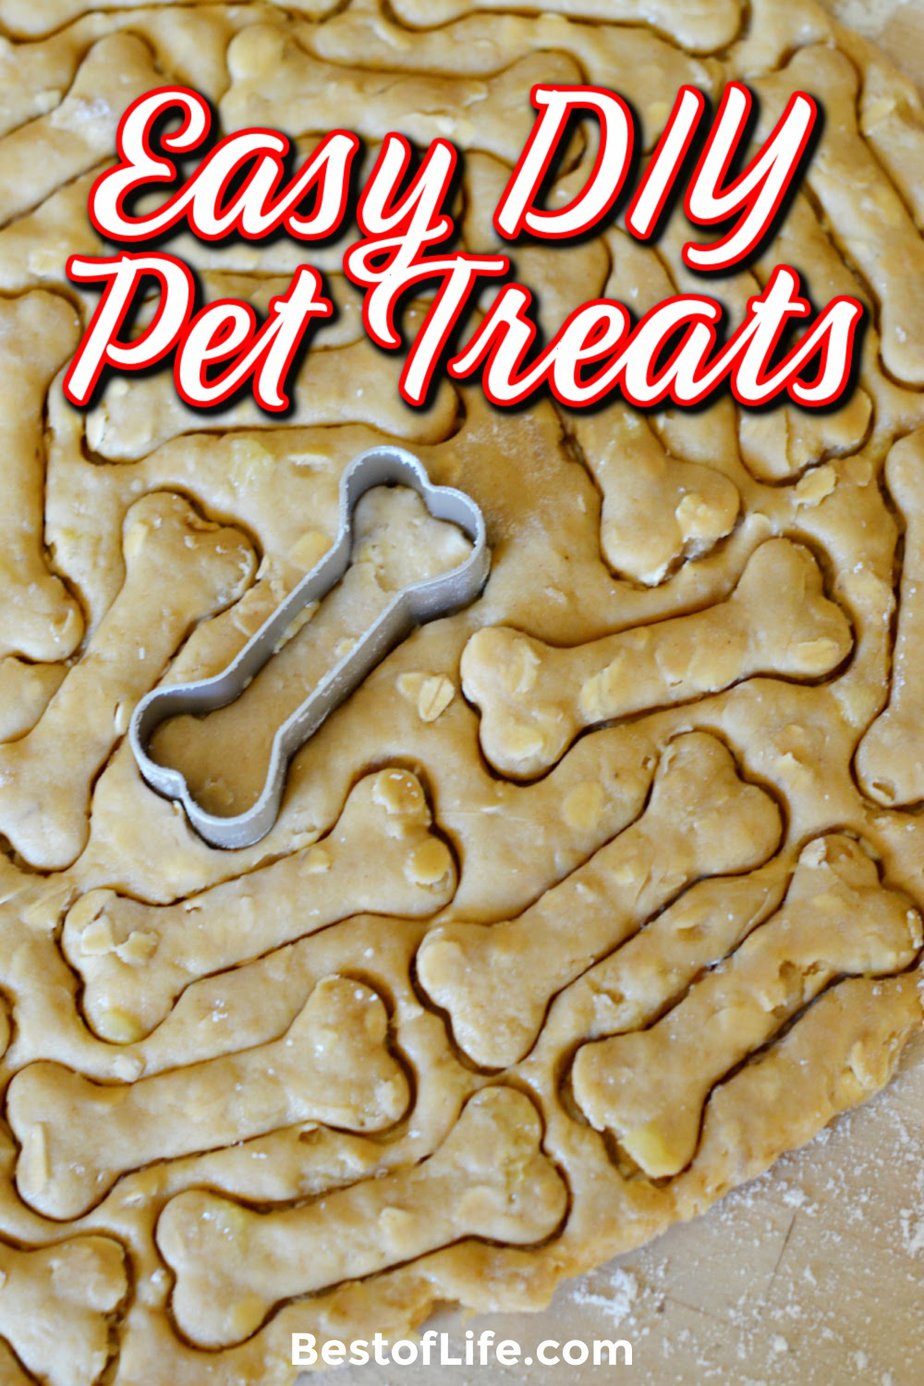 DIY pet treats are a great way to keep track of what you are feeding your pet, while also saving money as a pet owner. Pet Treats Recipes | Homemade Pet Treat Ideas | Tips for Packaging Pet Treats | Pet Treat Storage Ideas | DIY Pet Treat Jars | DIY Pet Food | Tips for Pet Owners | Ideas for Owning Pets #pets #DIY